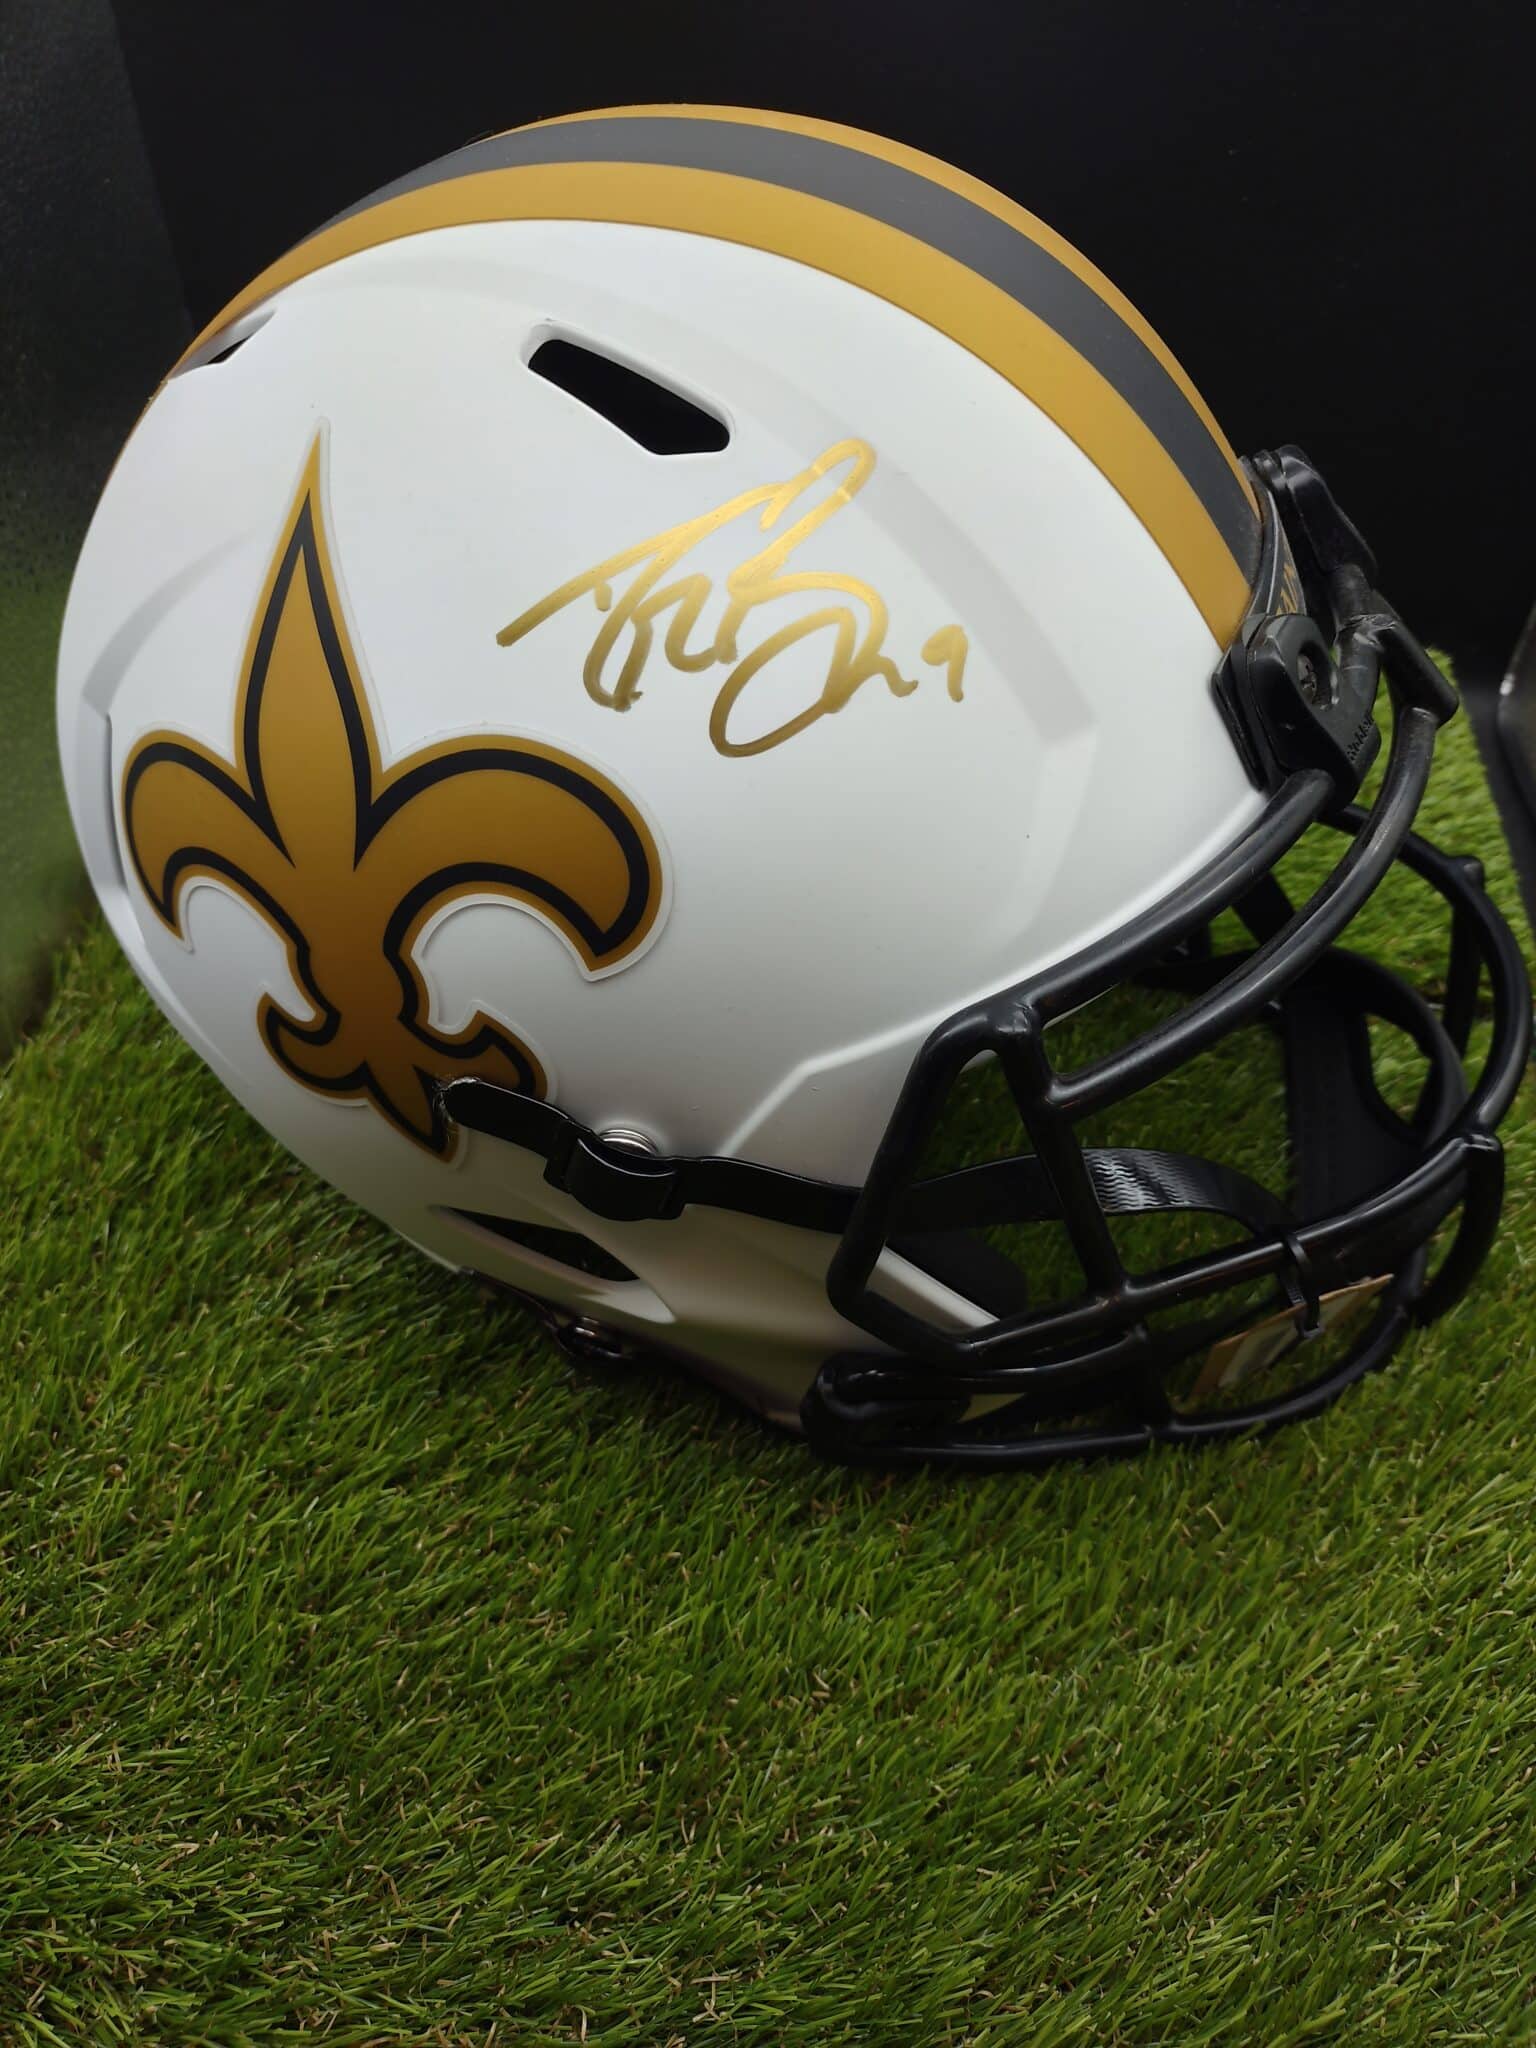 Drew Brees Lunar Eclipse Full Size Helmet » BS Collectibles